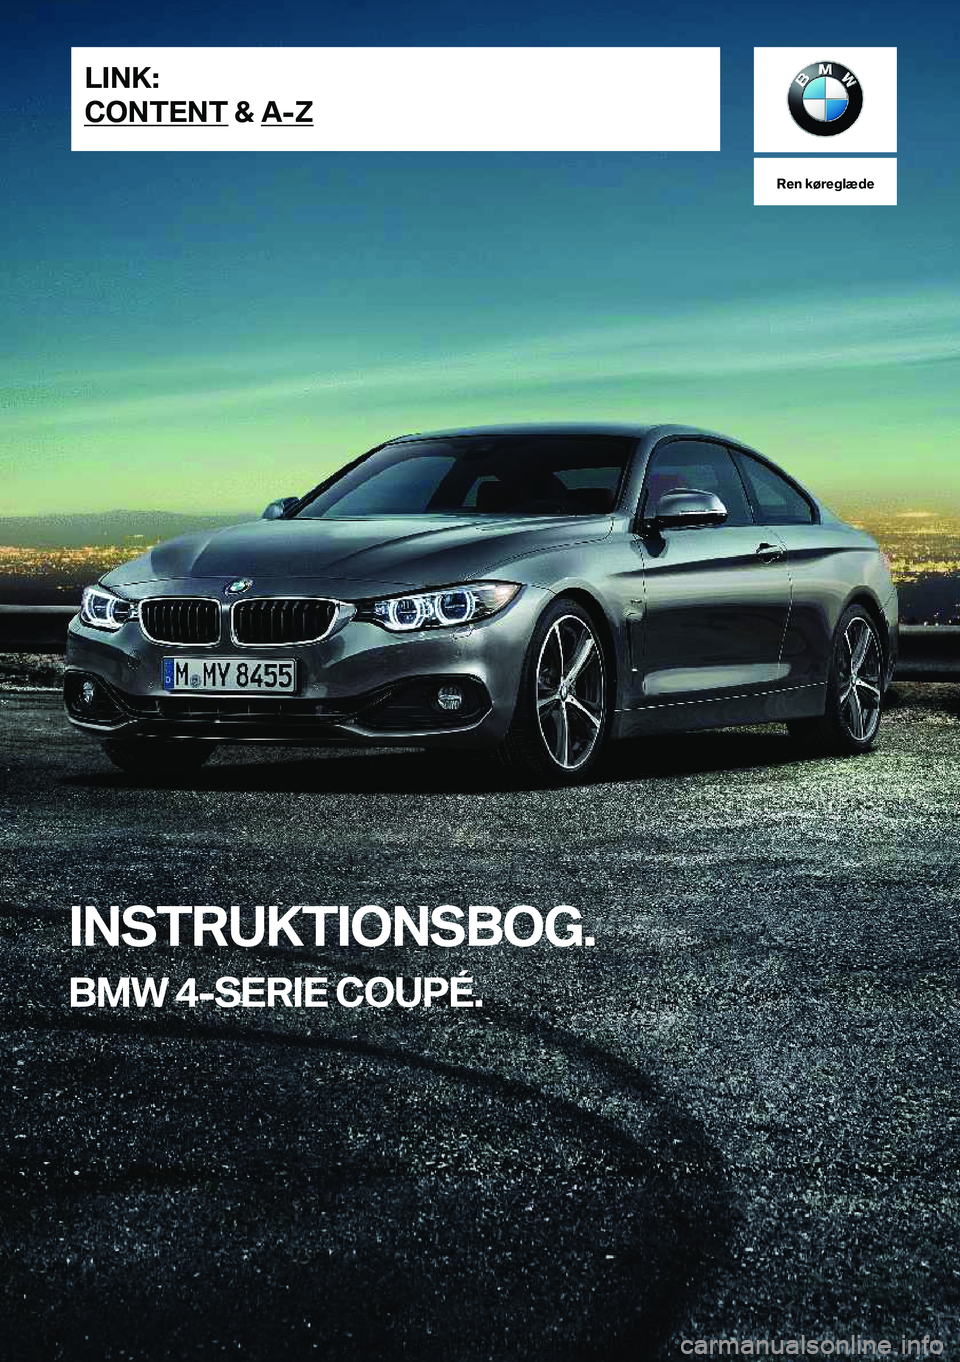 BMW 4 SERIES COUPE 2020  InstruktionsbØger (in Danish) �R�e�n��k�